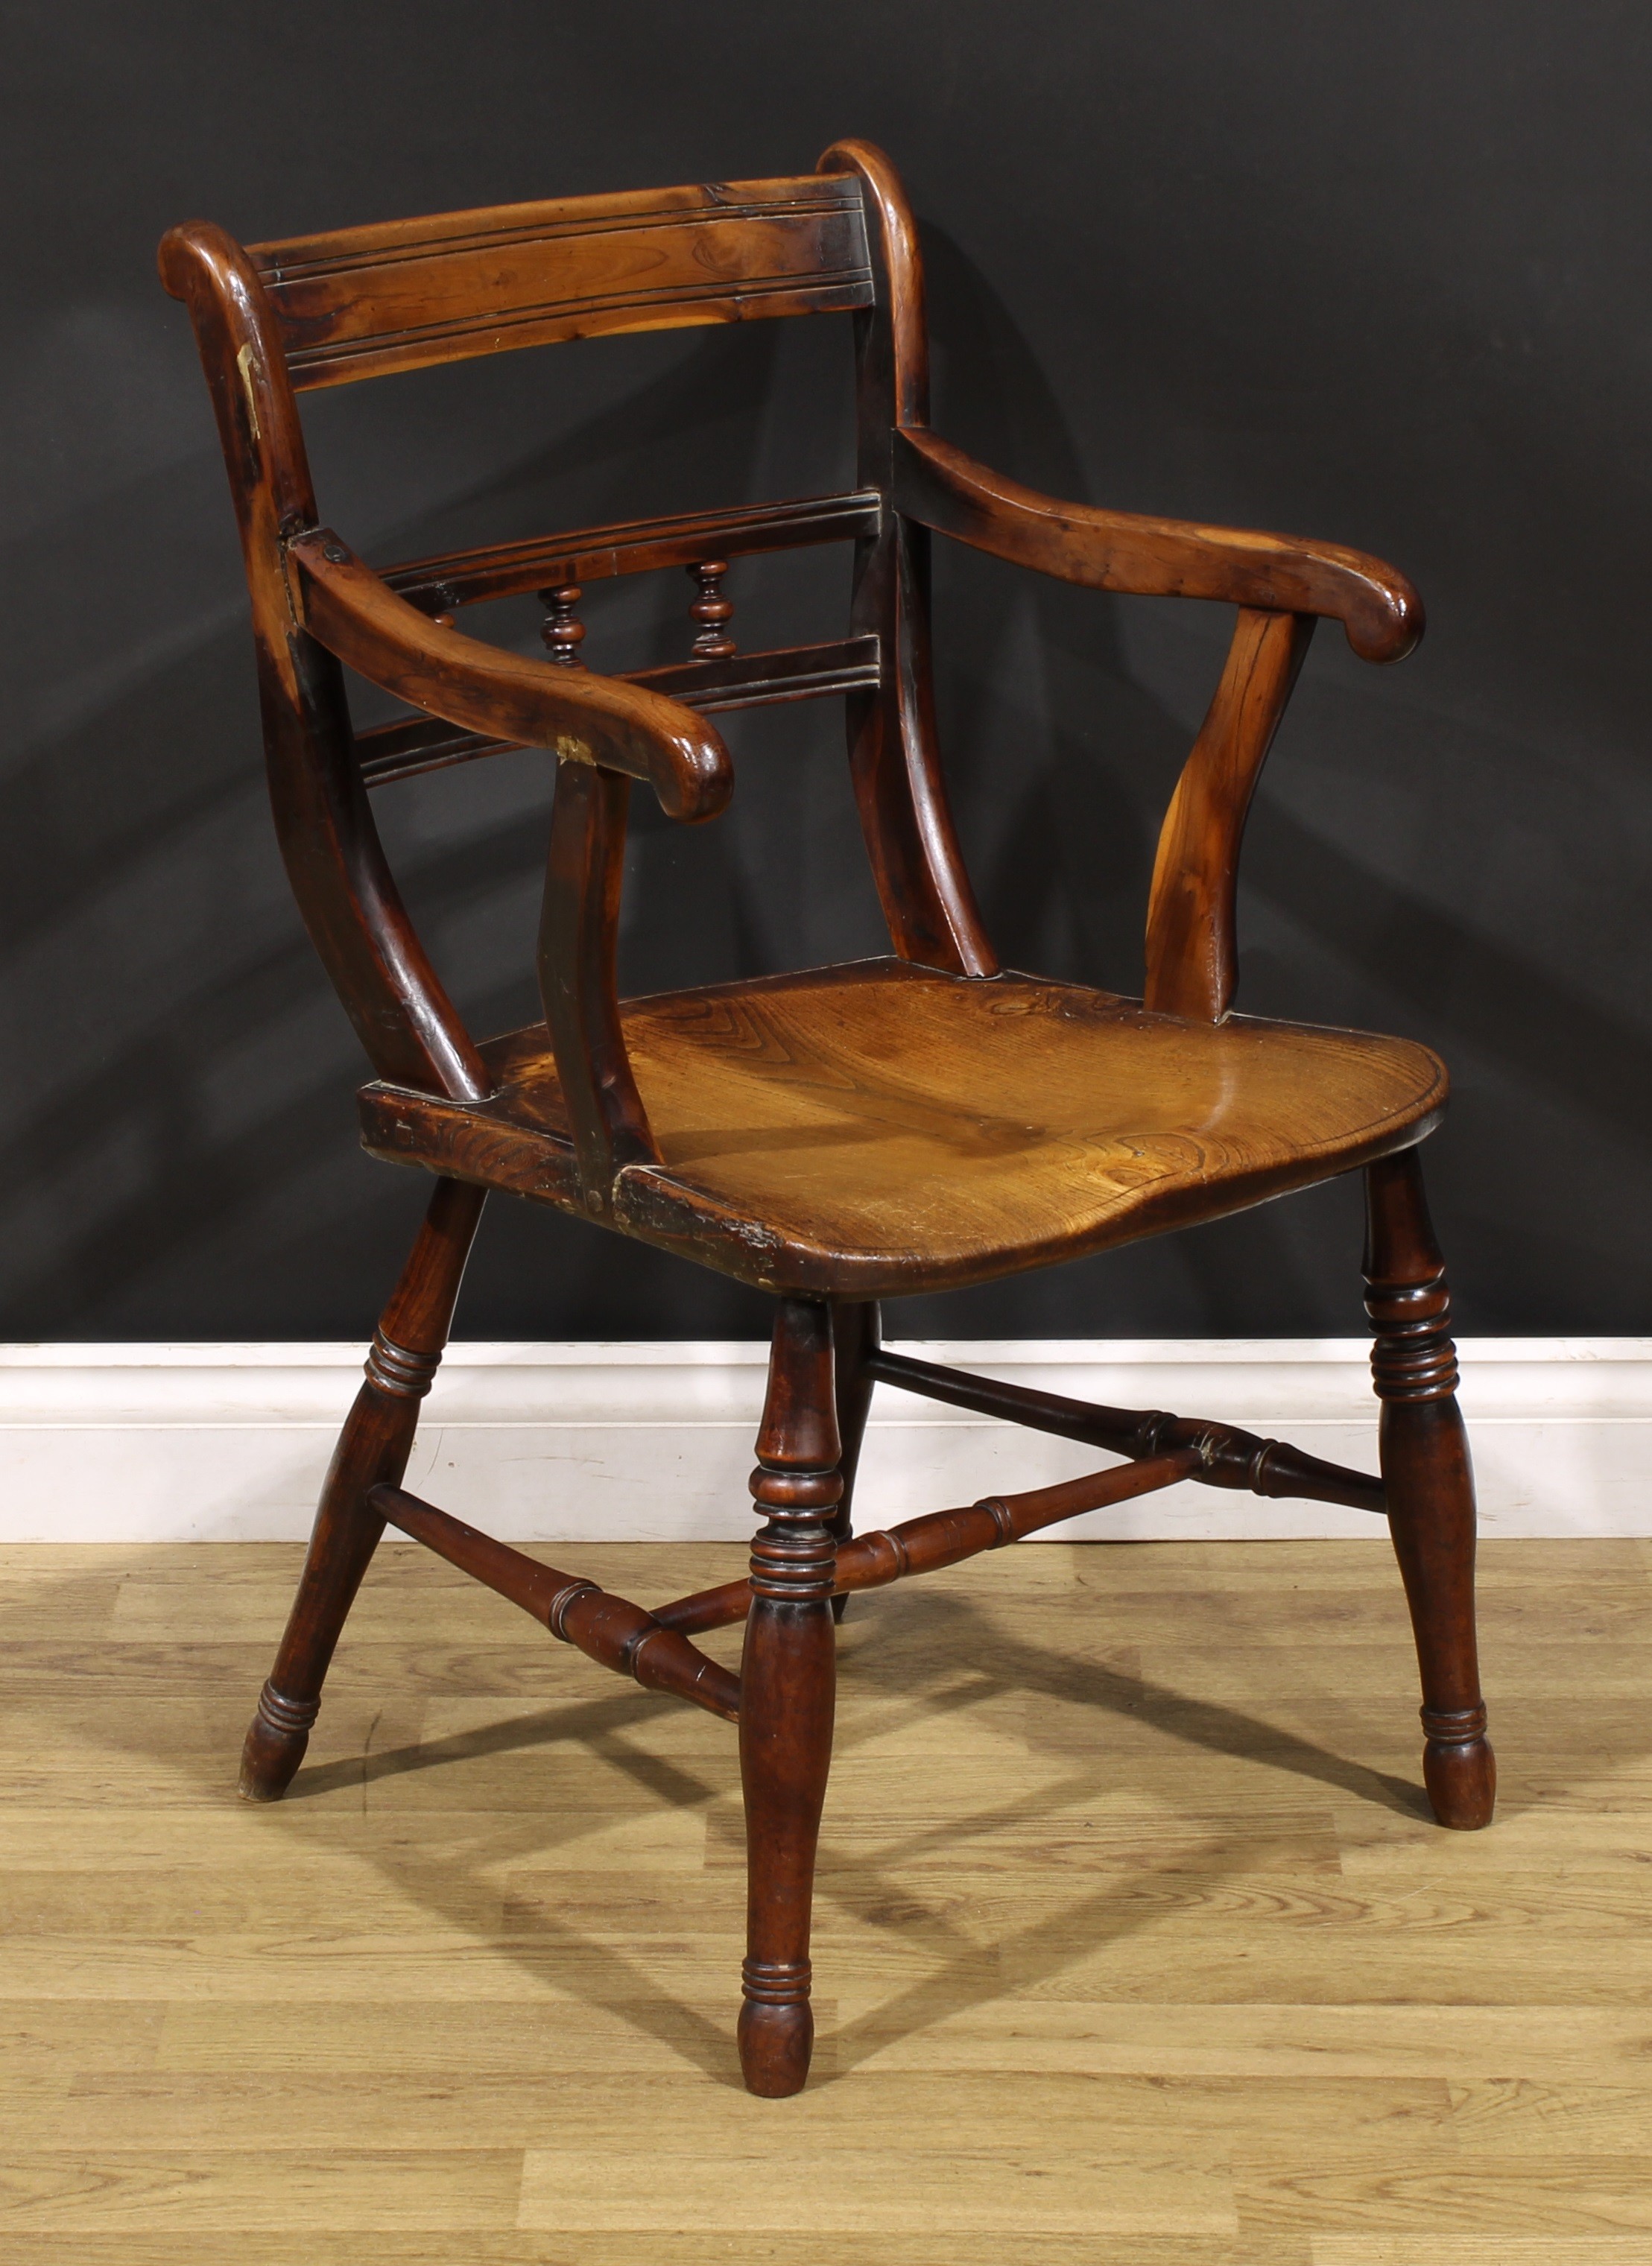 An early 19th century yew and elm elbow chair, saddle seat, turned legs, H-stretcher, 86cm high, - Image 2 of 4